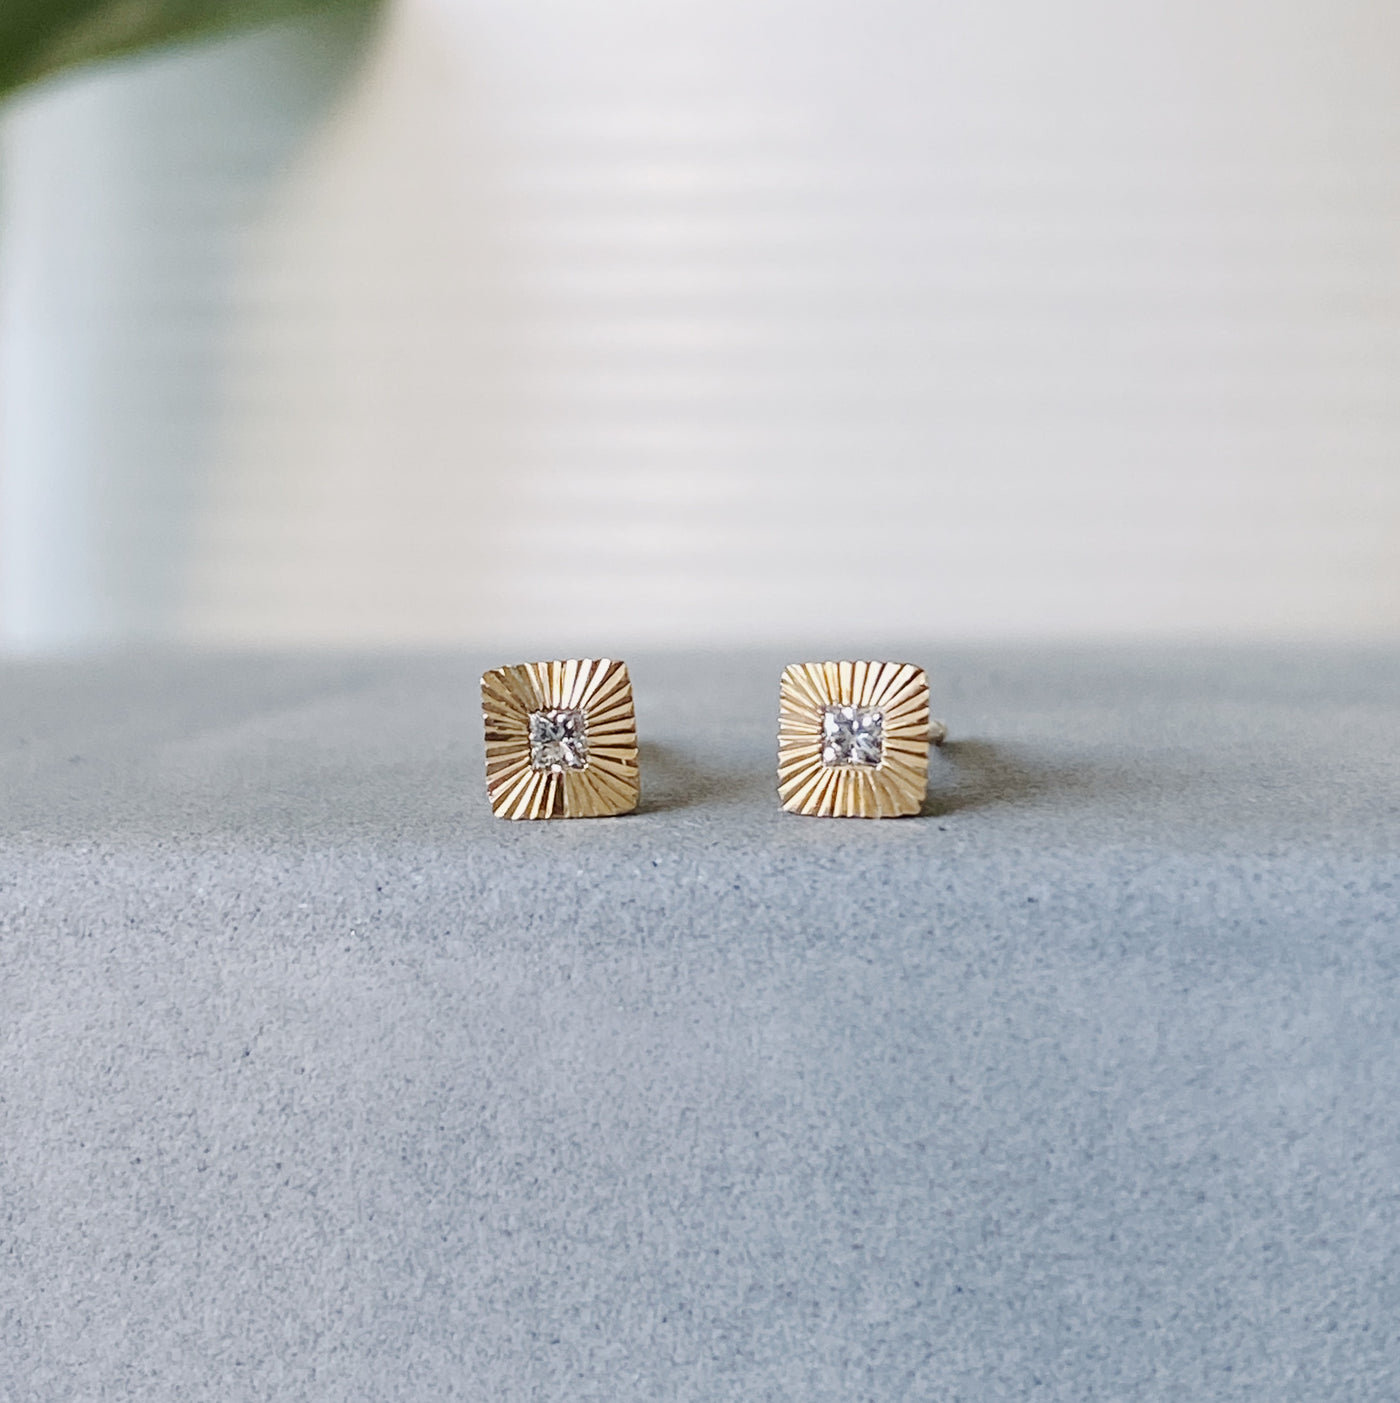 Square 14k yellow gold Aurora stud earrings with princess cut diamond centers and engraved rays in natural light